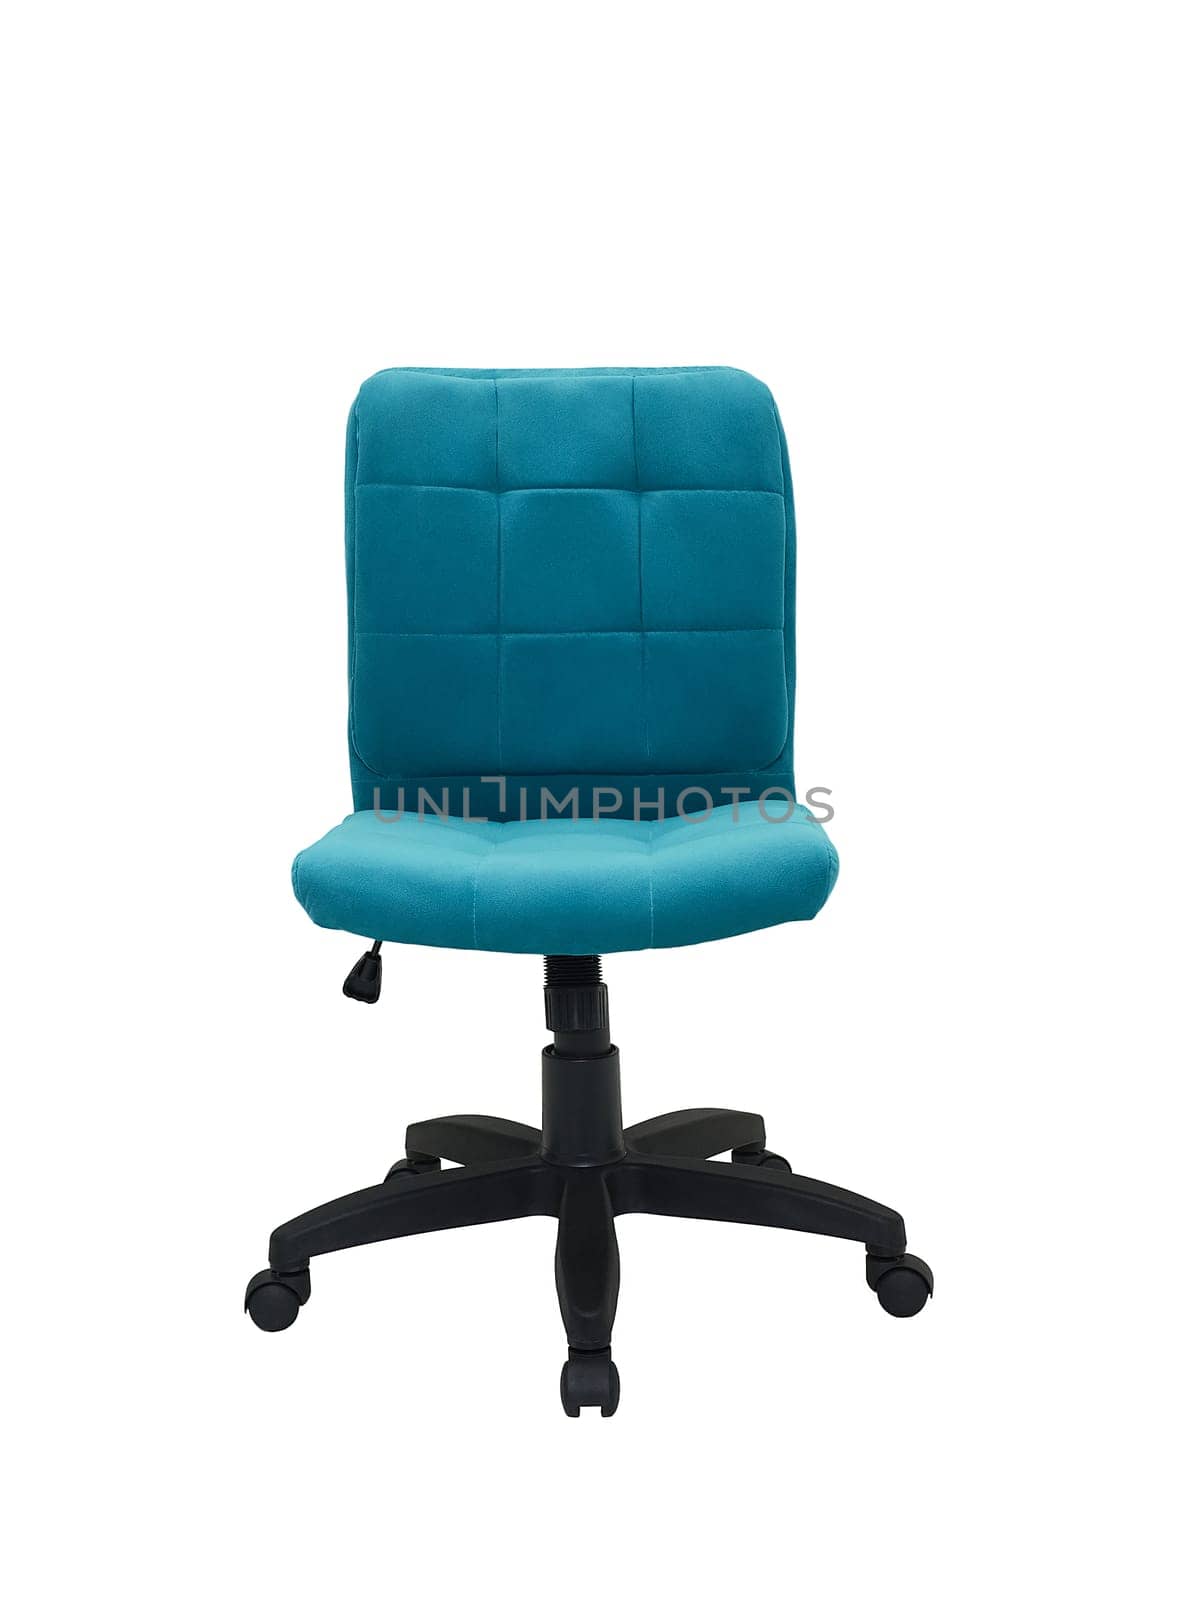 blue office fabric armchair on wheels isolated on white background, front view. modern furniture, interior, home design